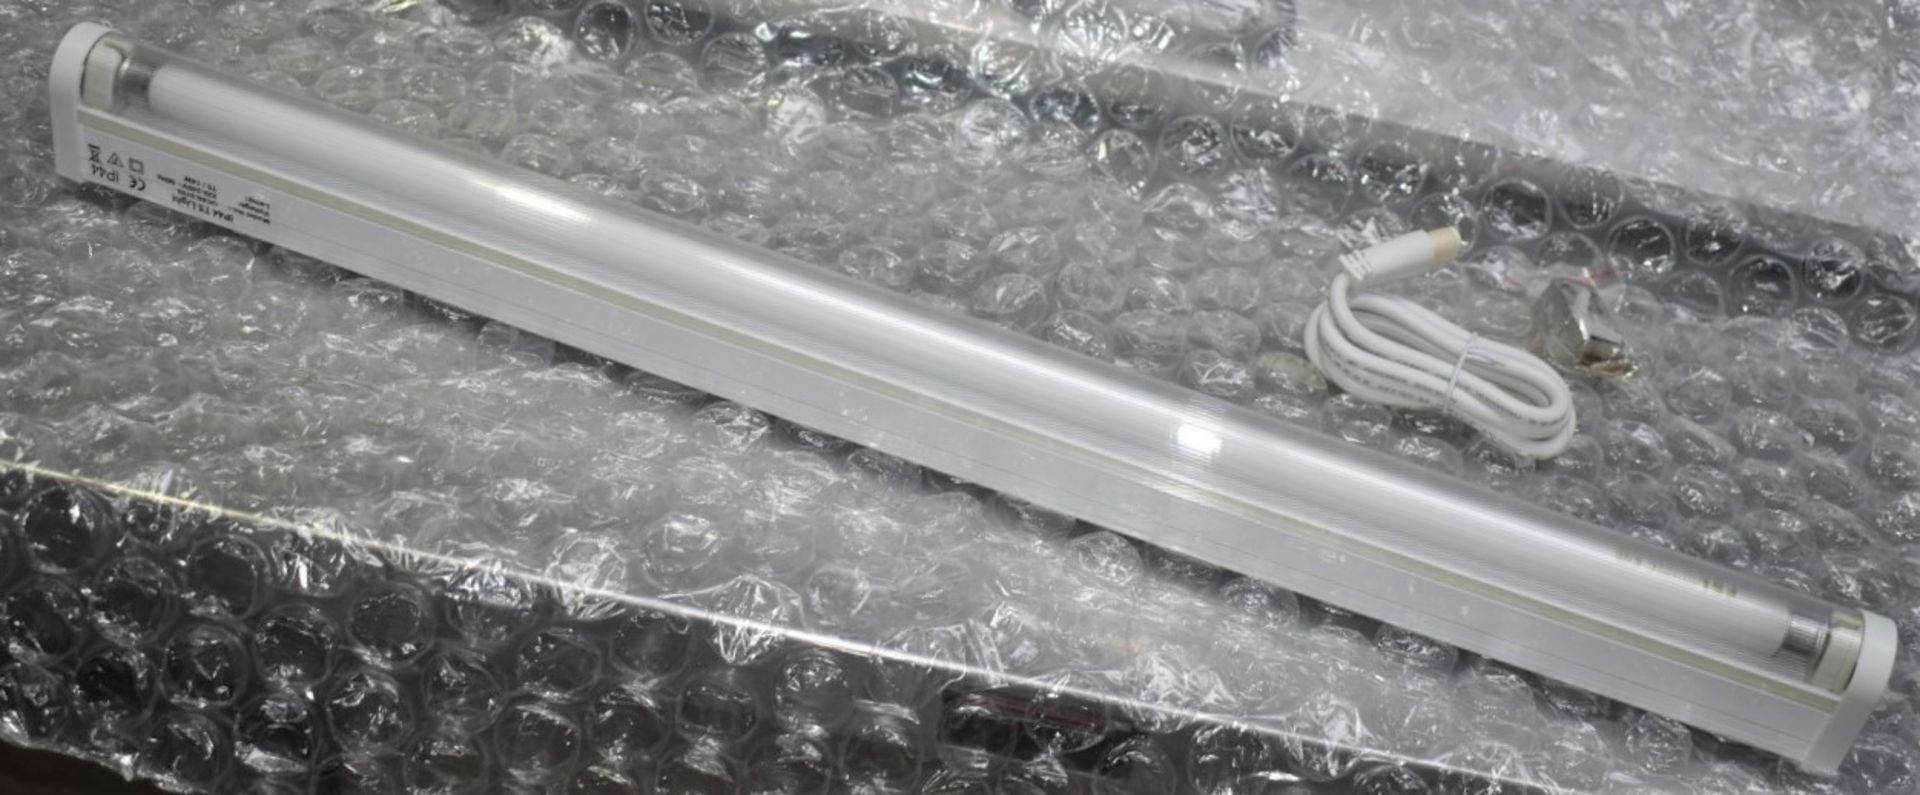 4 x Bathroom Light Fittings - IP44 Waterproof T5 14w Fluorescent Lights With Built-In Electronic - Image 3 of 11